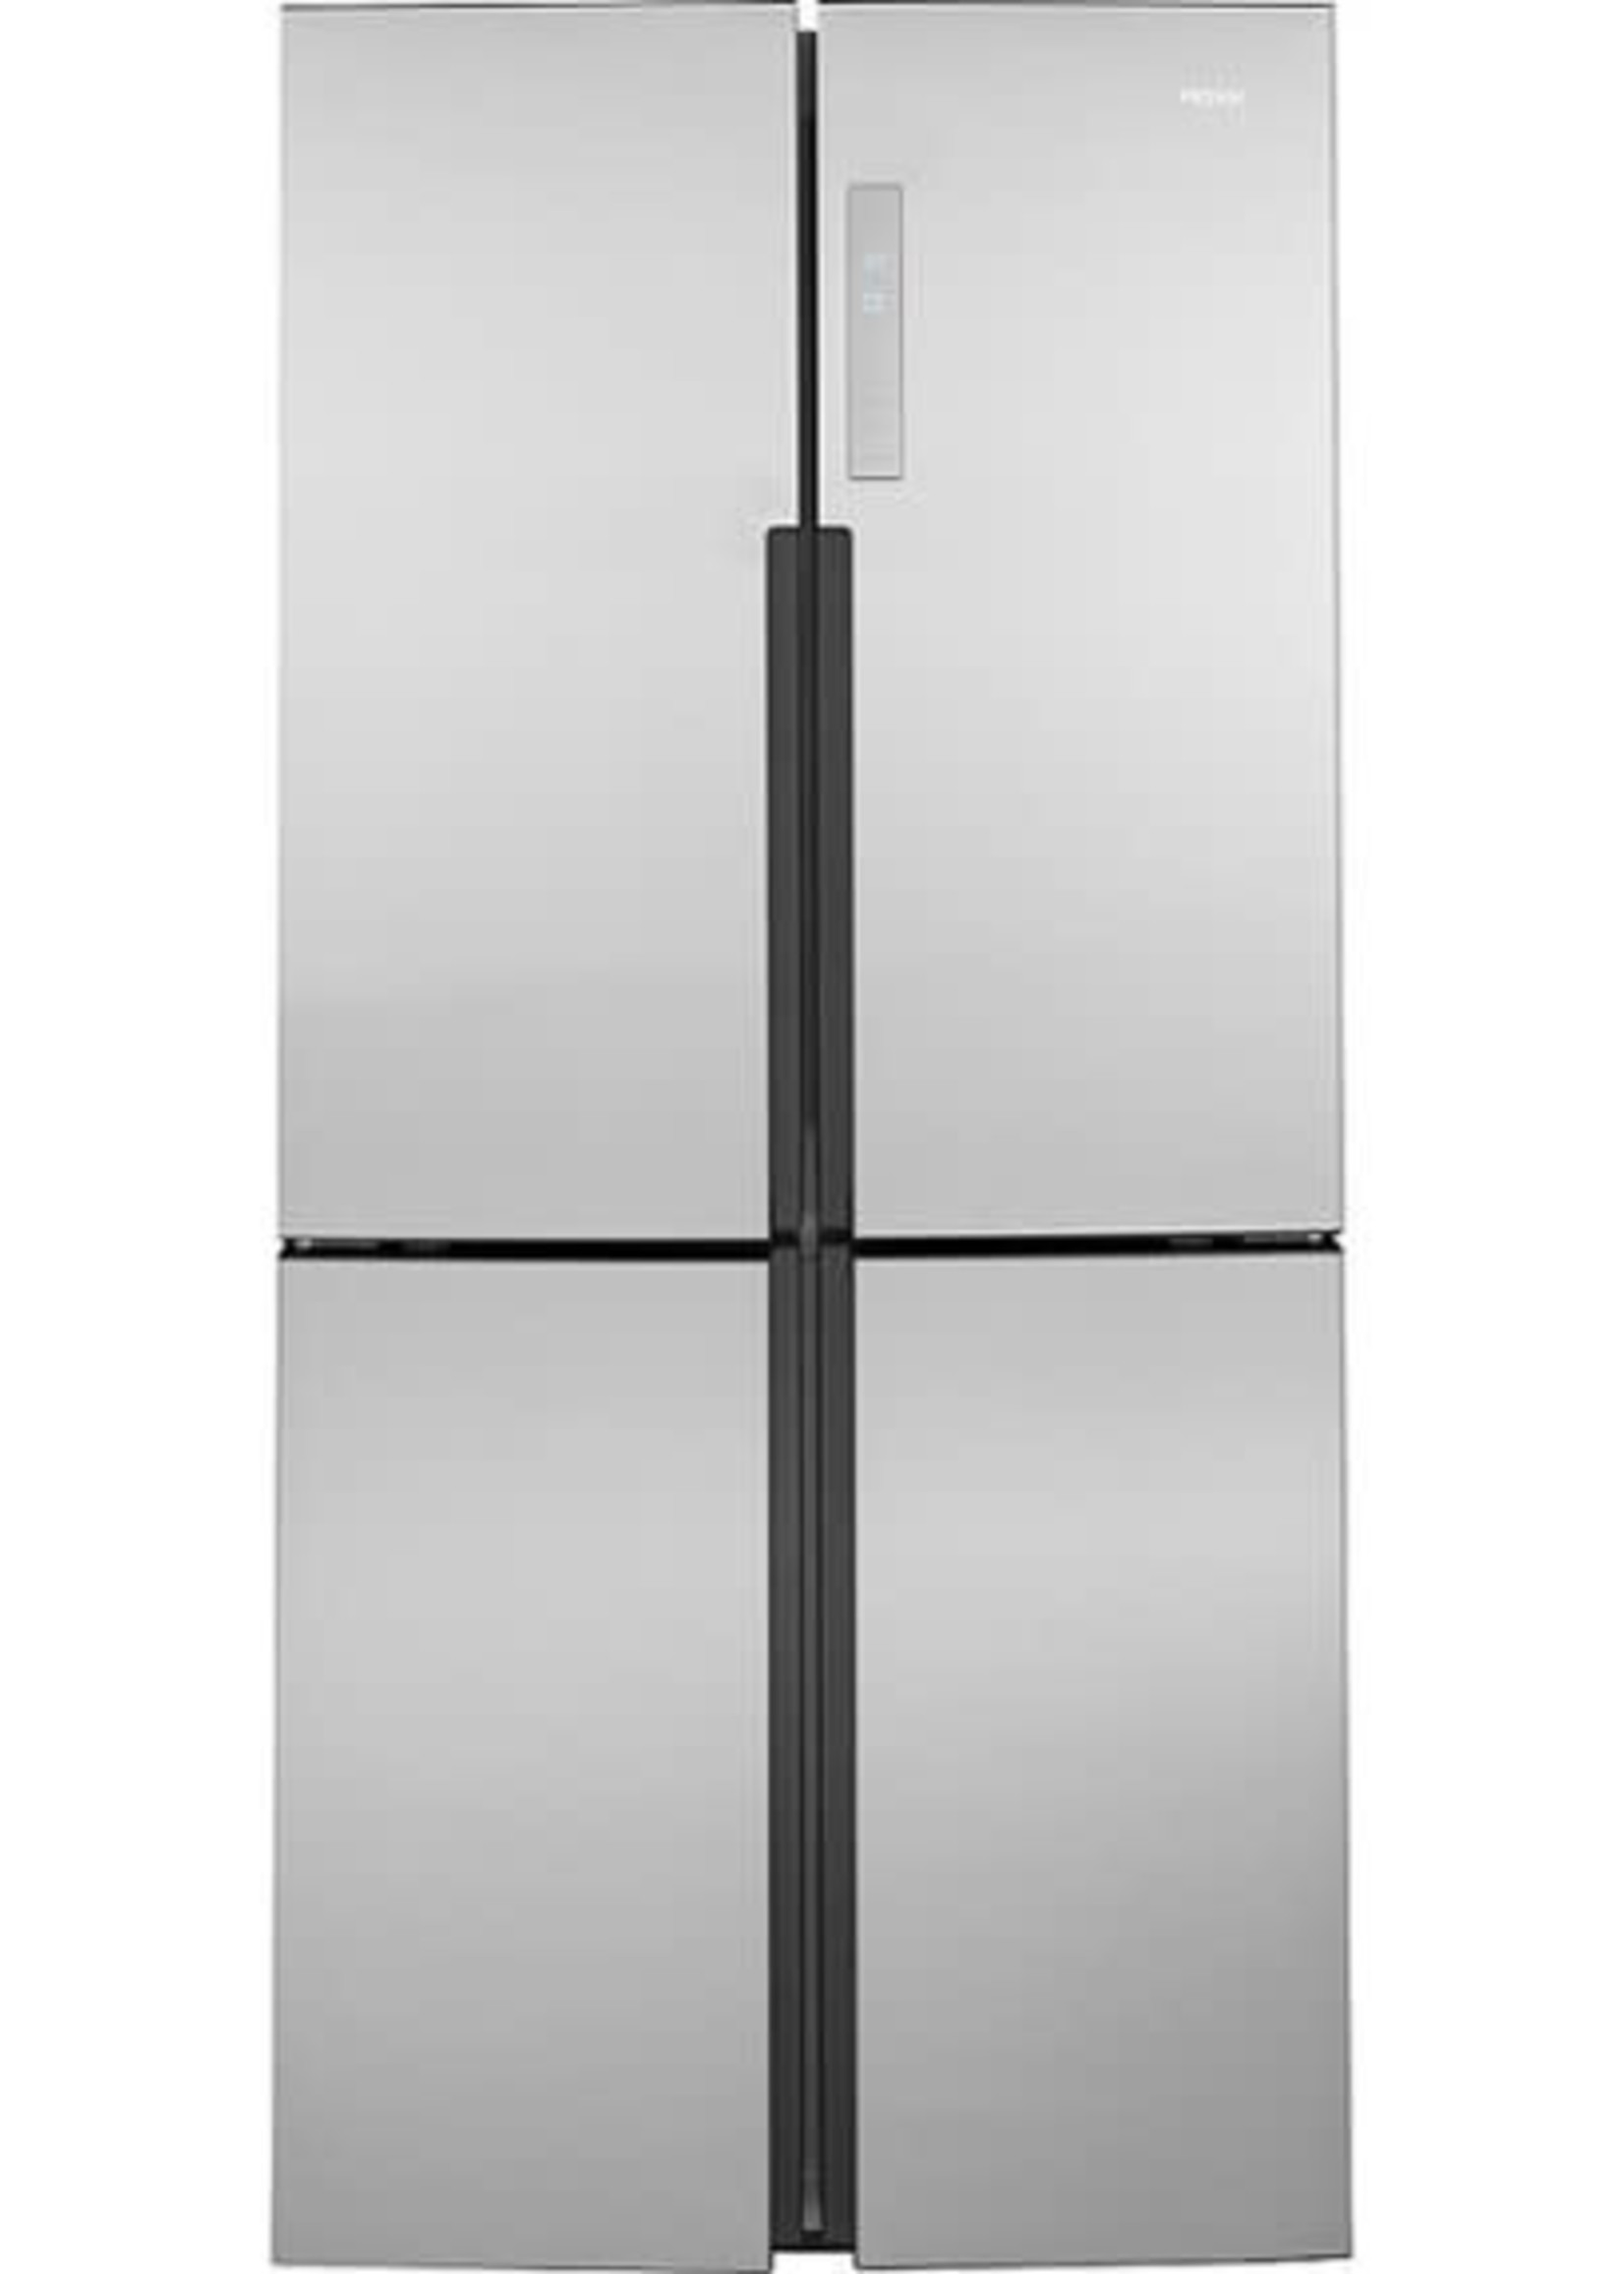 Haier *Haier QHE16HYPFS   16.4 Cu. Ft. Quad Door Counter Depth Refrigerator with Fingerprint Resistant Stainless - Stainless Steel